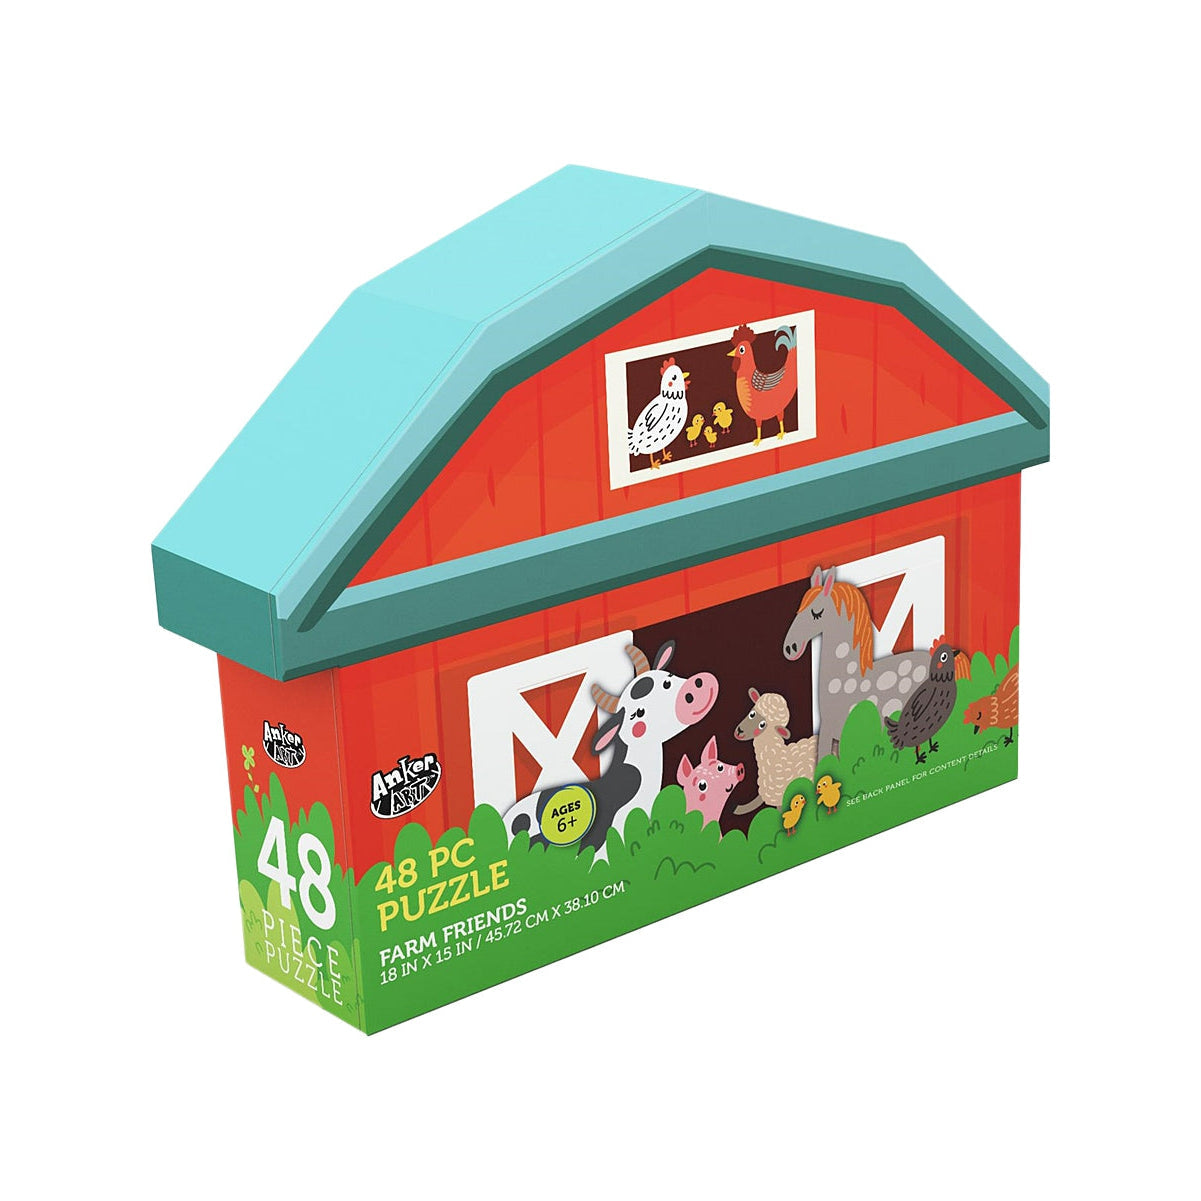 Anker Play 48 Piece Shaped Building Puzzle - Farm Friends-Anker Play Products-Little Giant Kidz